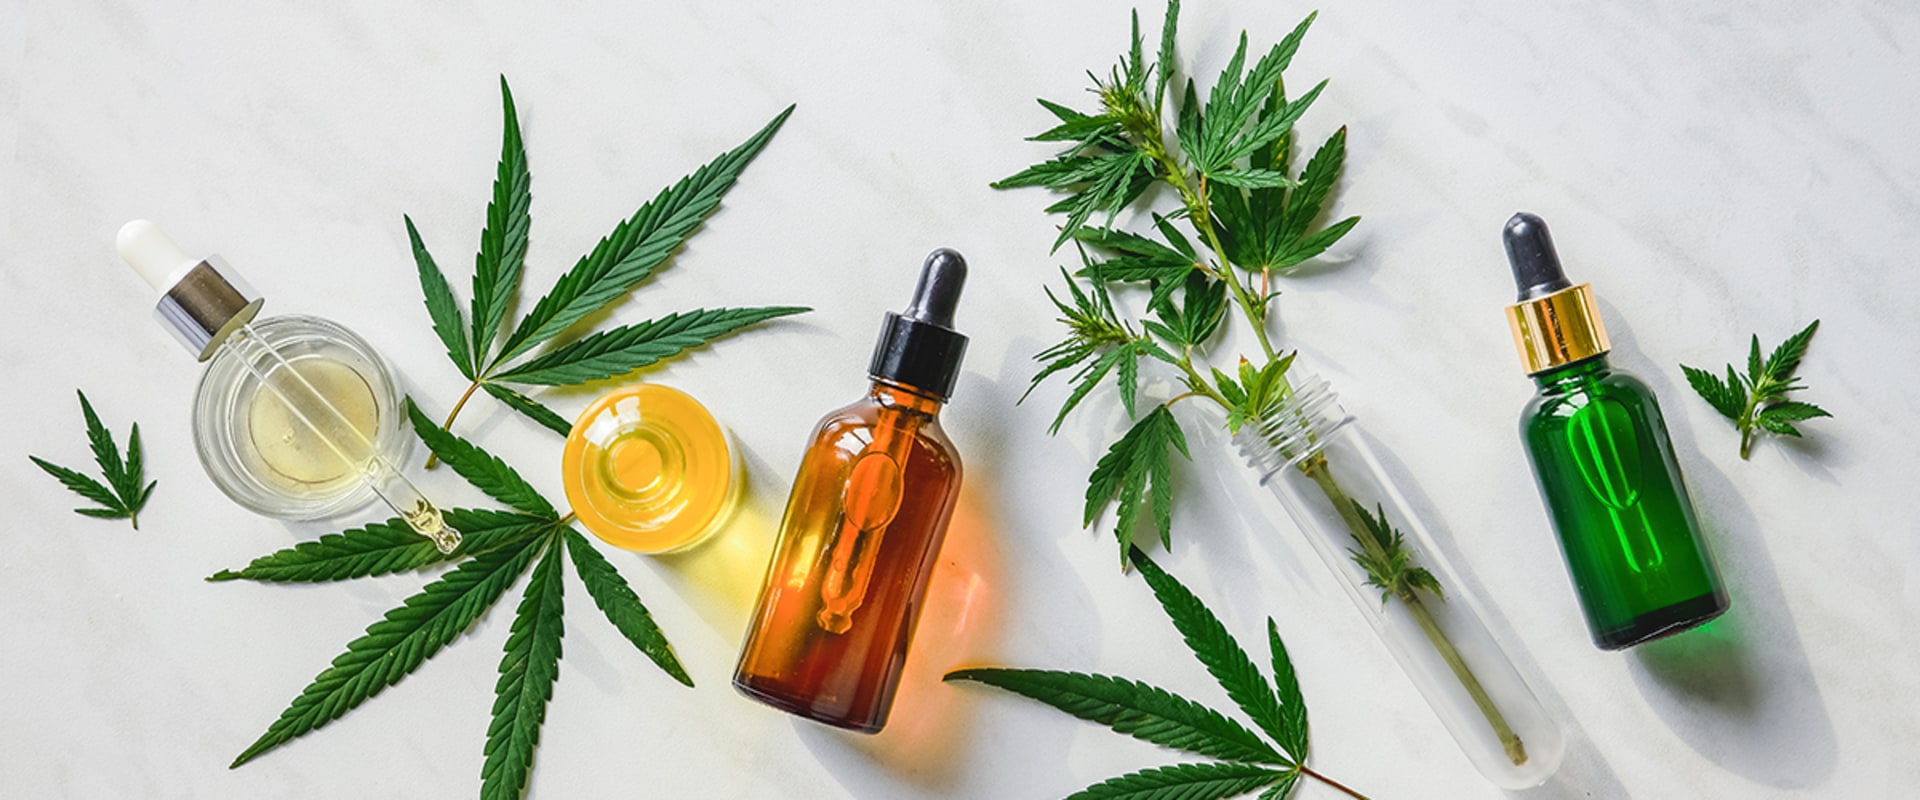 Can Hemp Oil Help with Pain Relief?